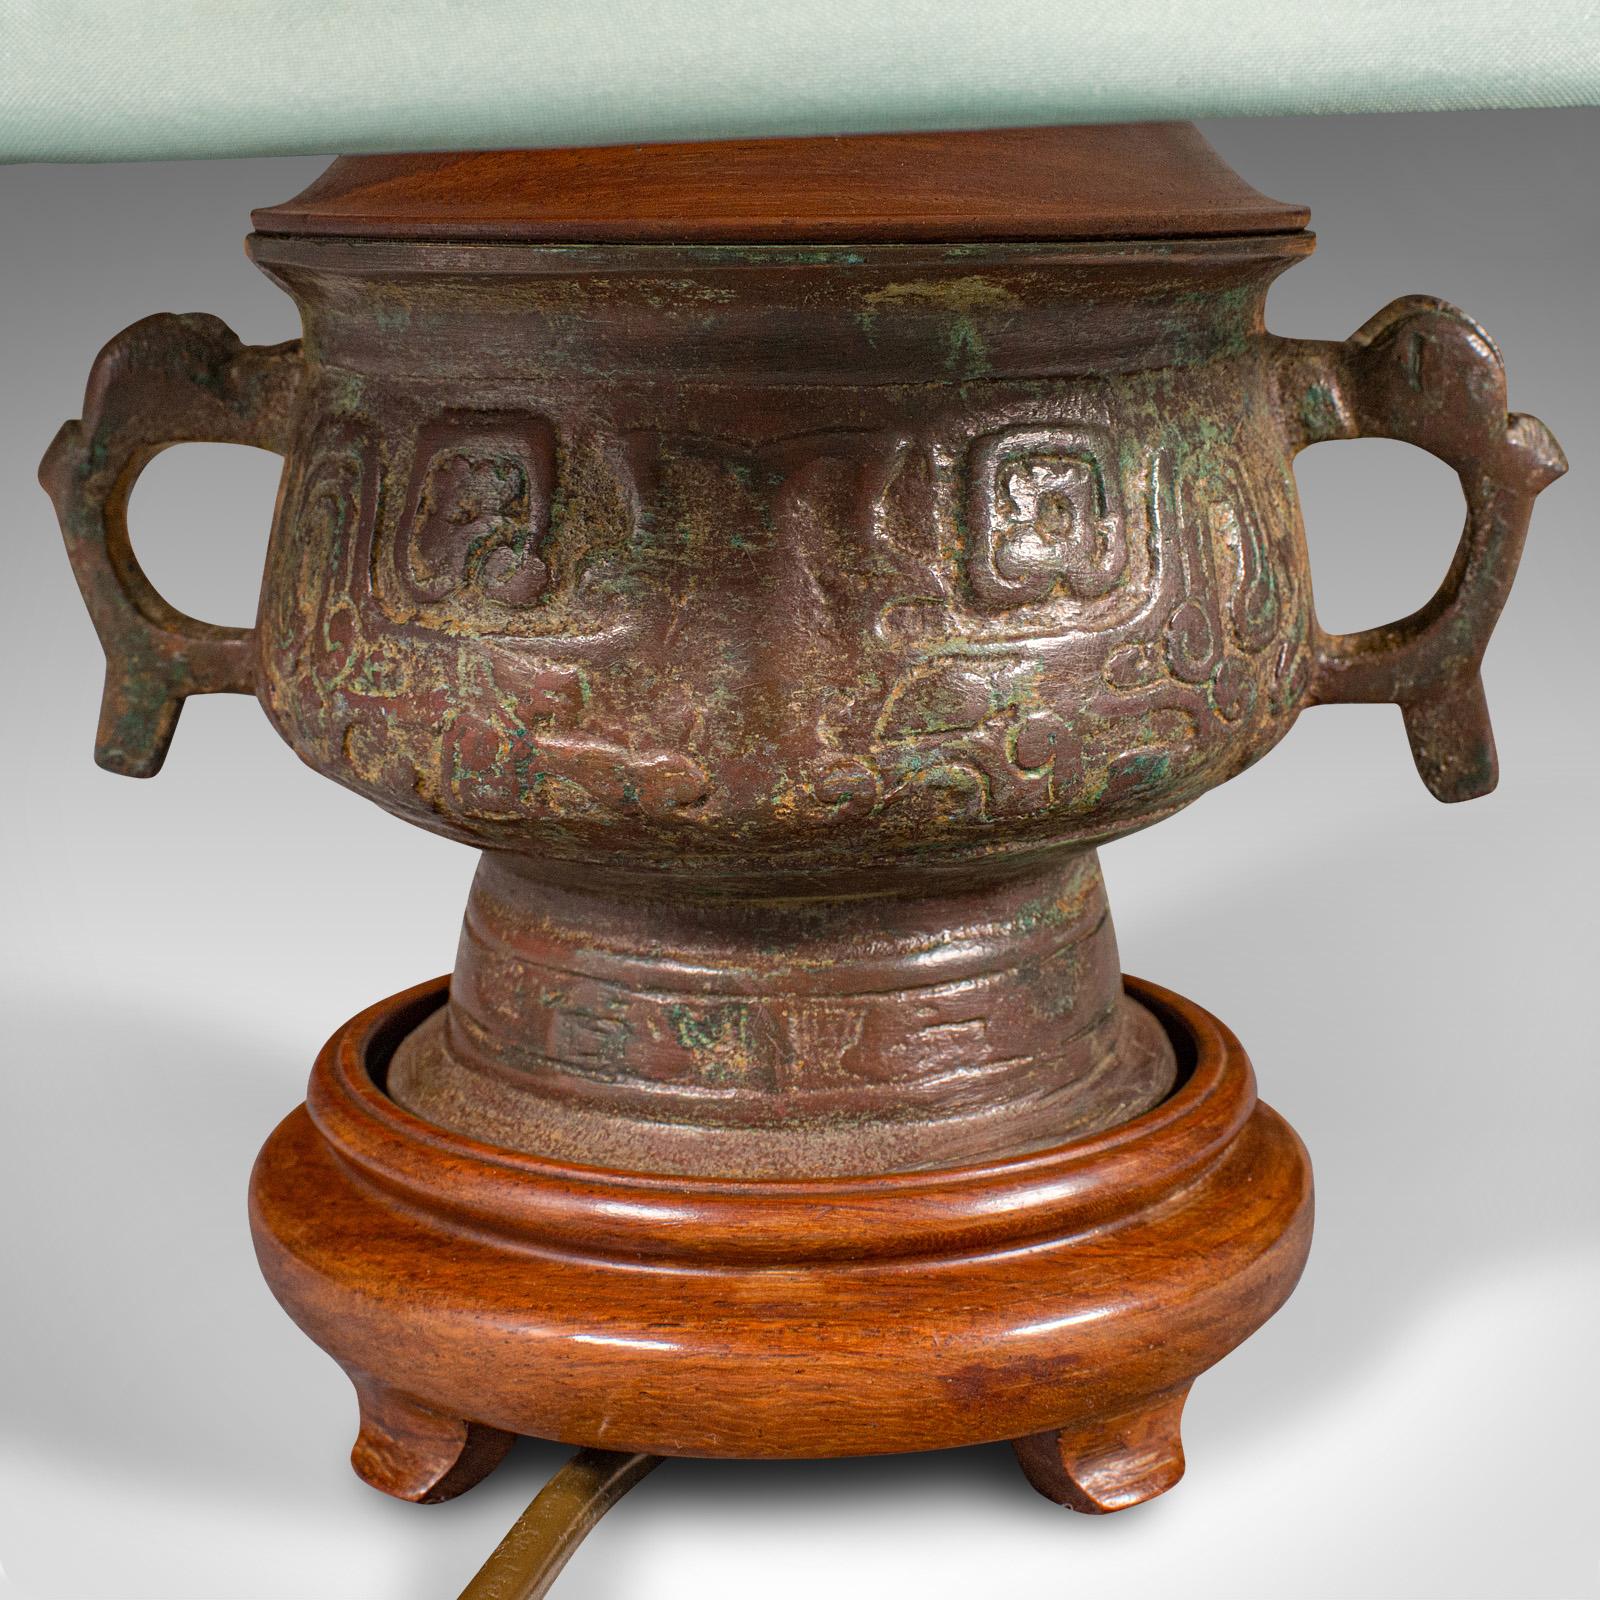 Small Vintage Side Lamp, Chinese, Bronze, Desk, Table Light, Decor, Circa 1970 For Sale 4